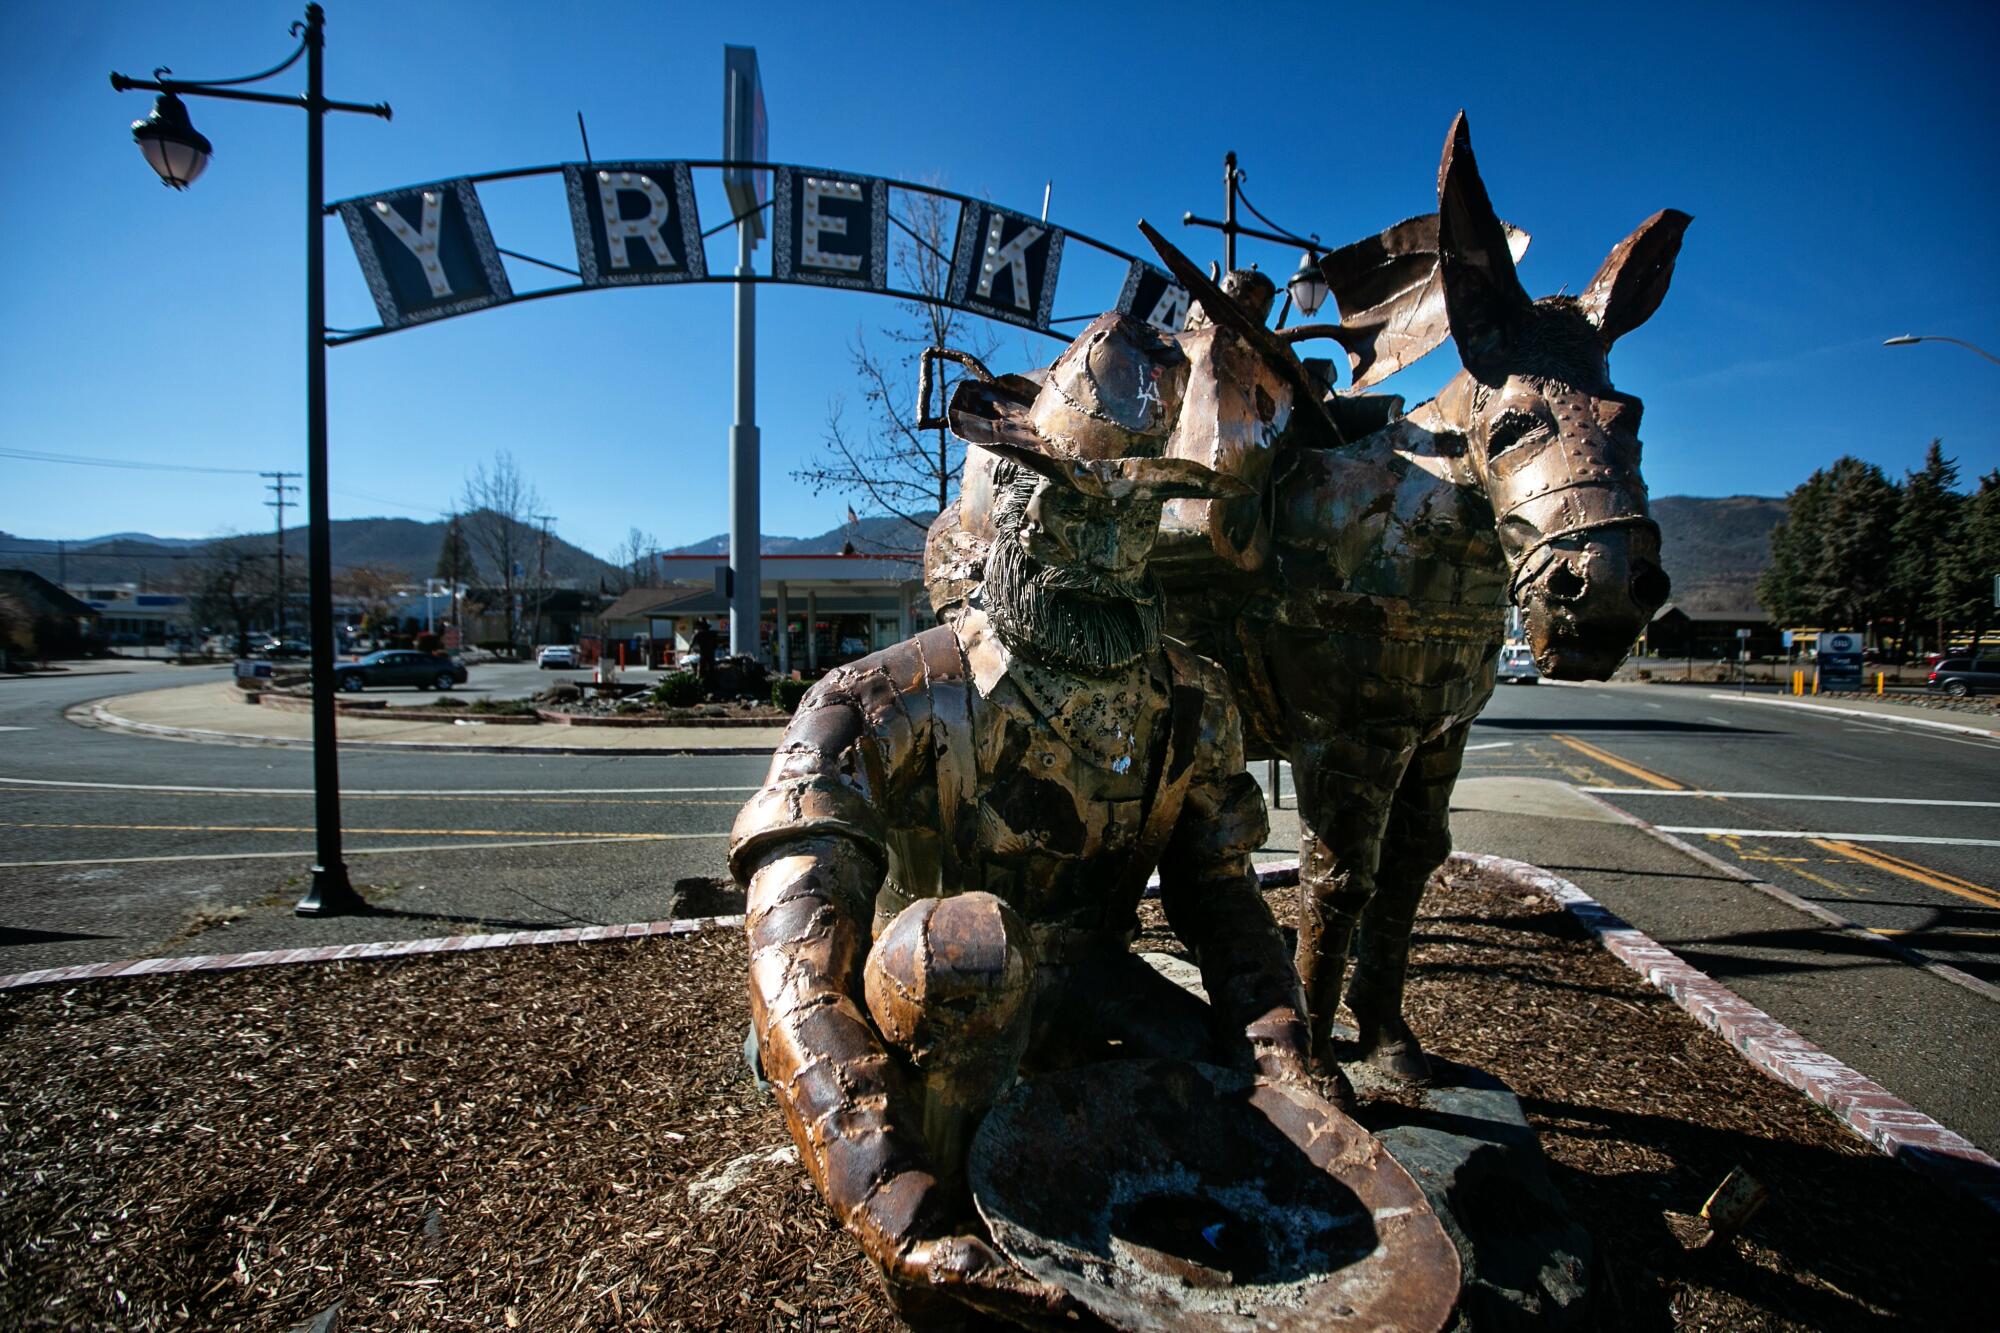 A bearded prospector panning for gold and his pack mule greet visitors to Yreka.